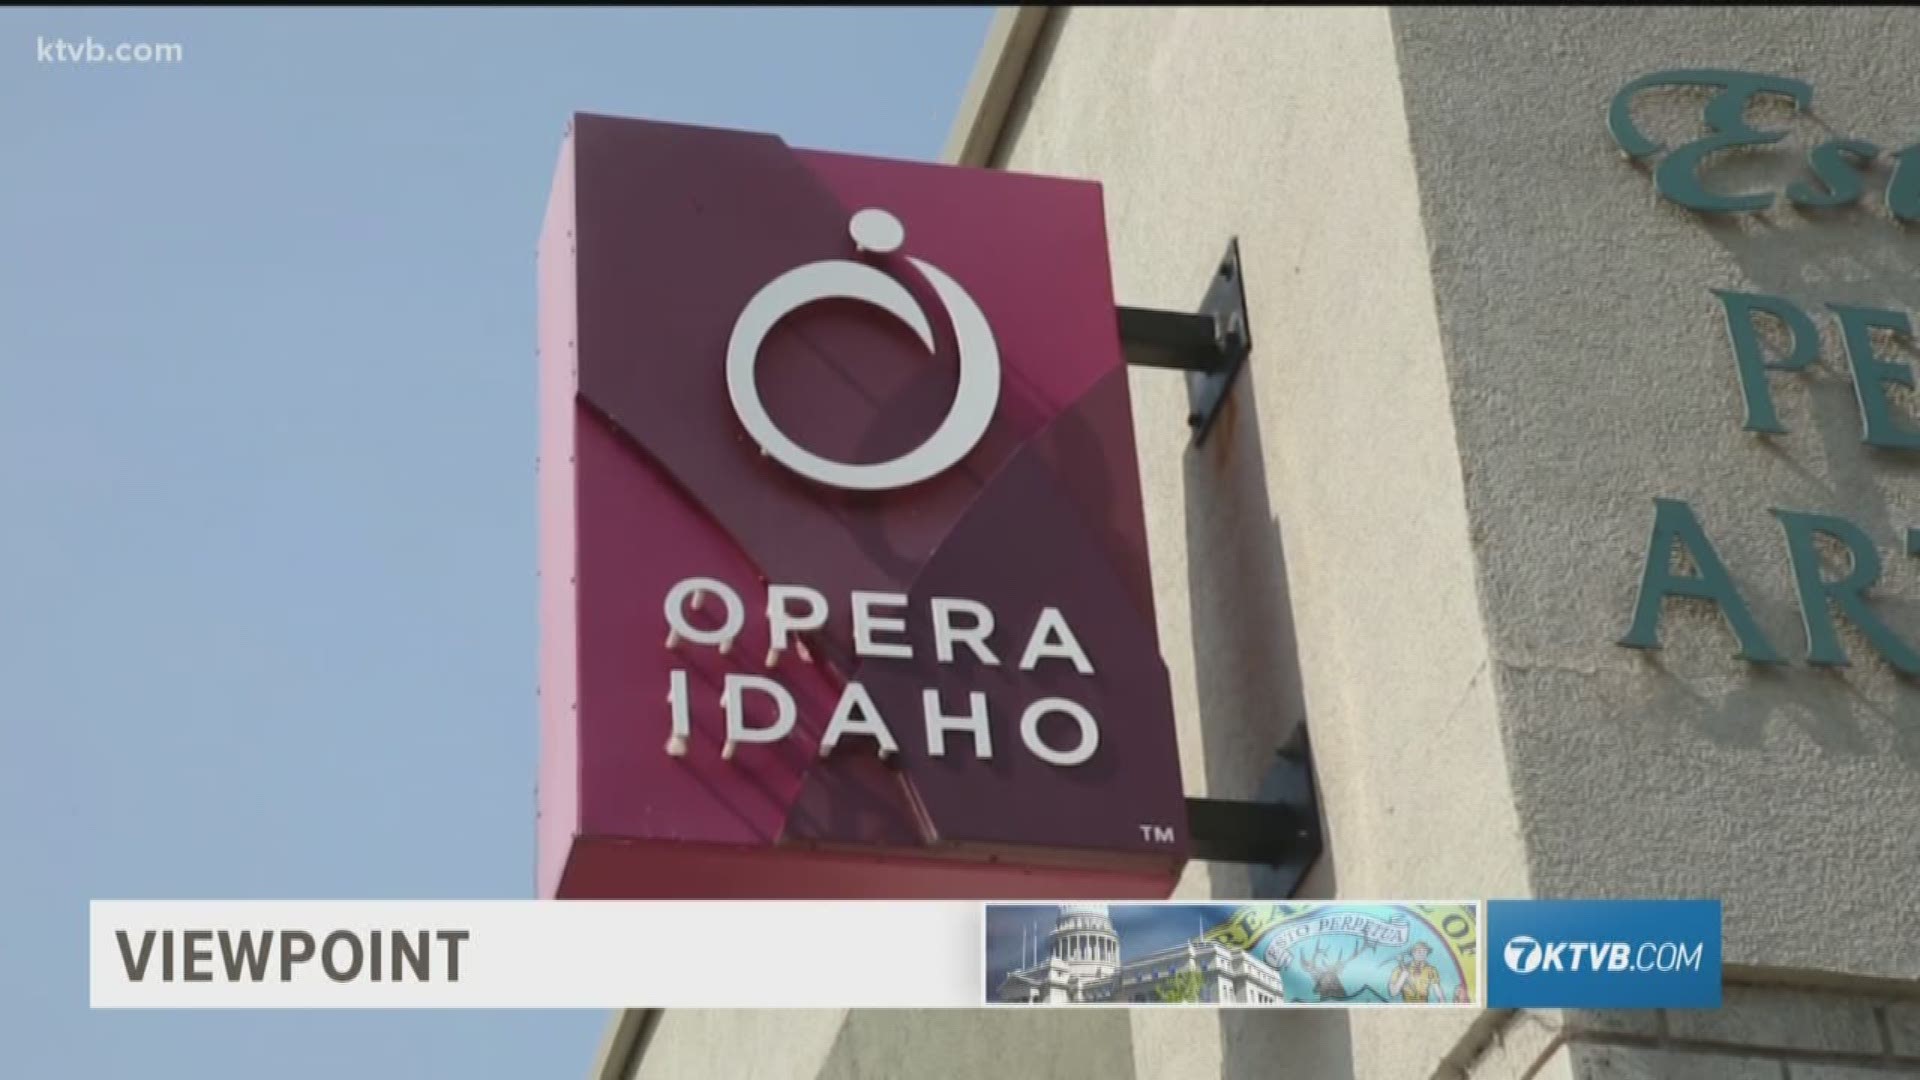 They are two of Idaho's premier arts organizations. On Viewpoint, Doug Petcash has in-depth conversations with the leaders of Opera Idaho and Ballet Idaho about their artistic focus and their upcoming seasons.